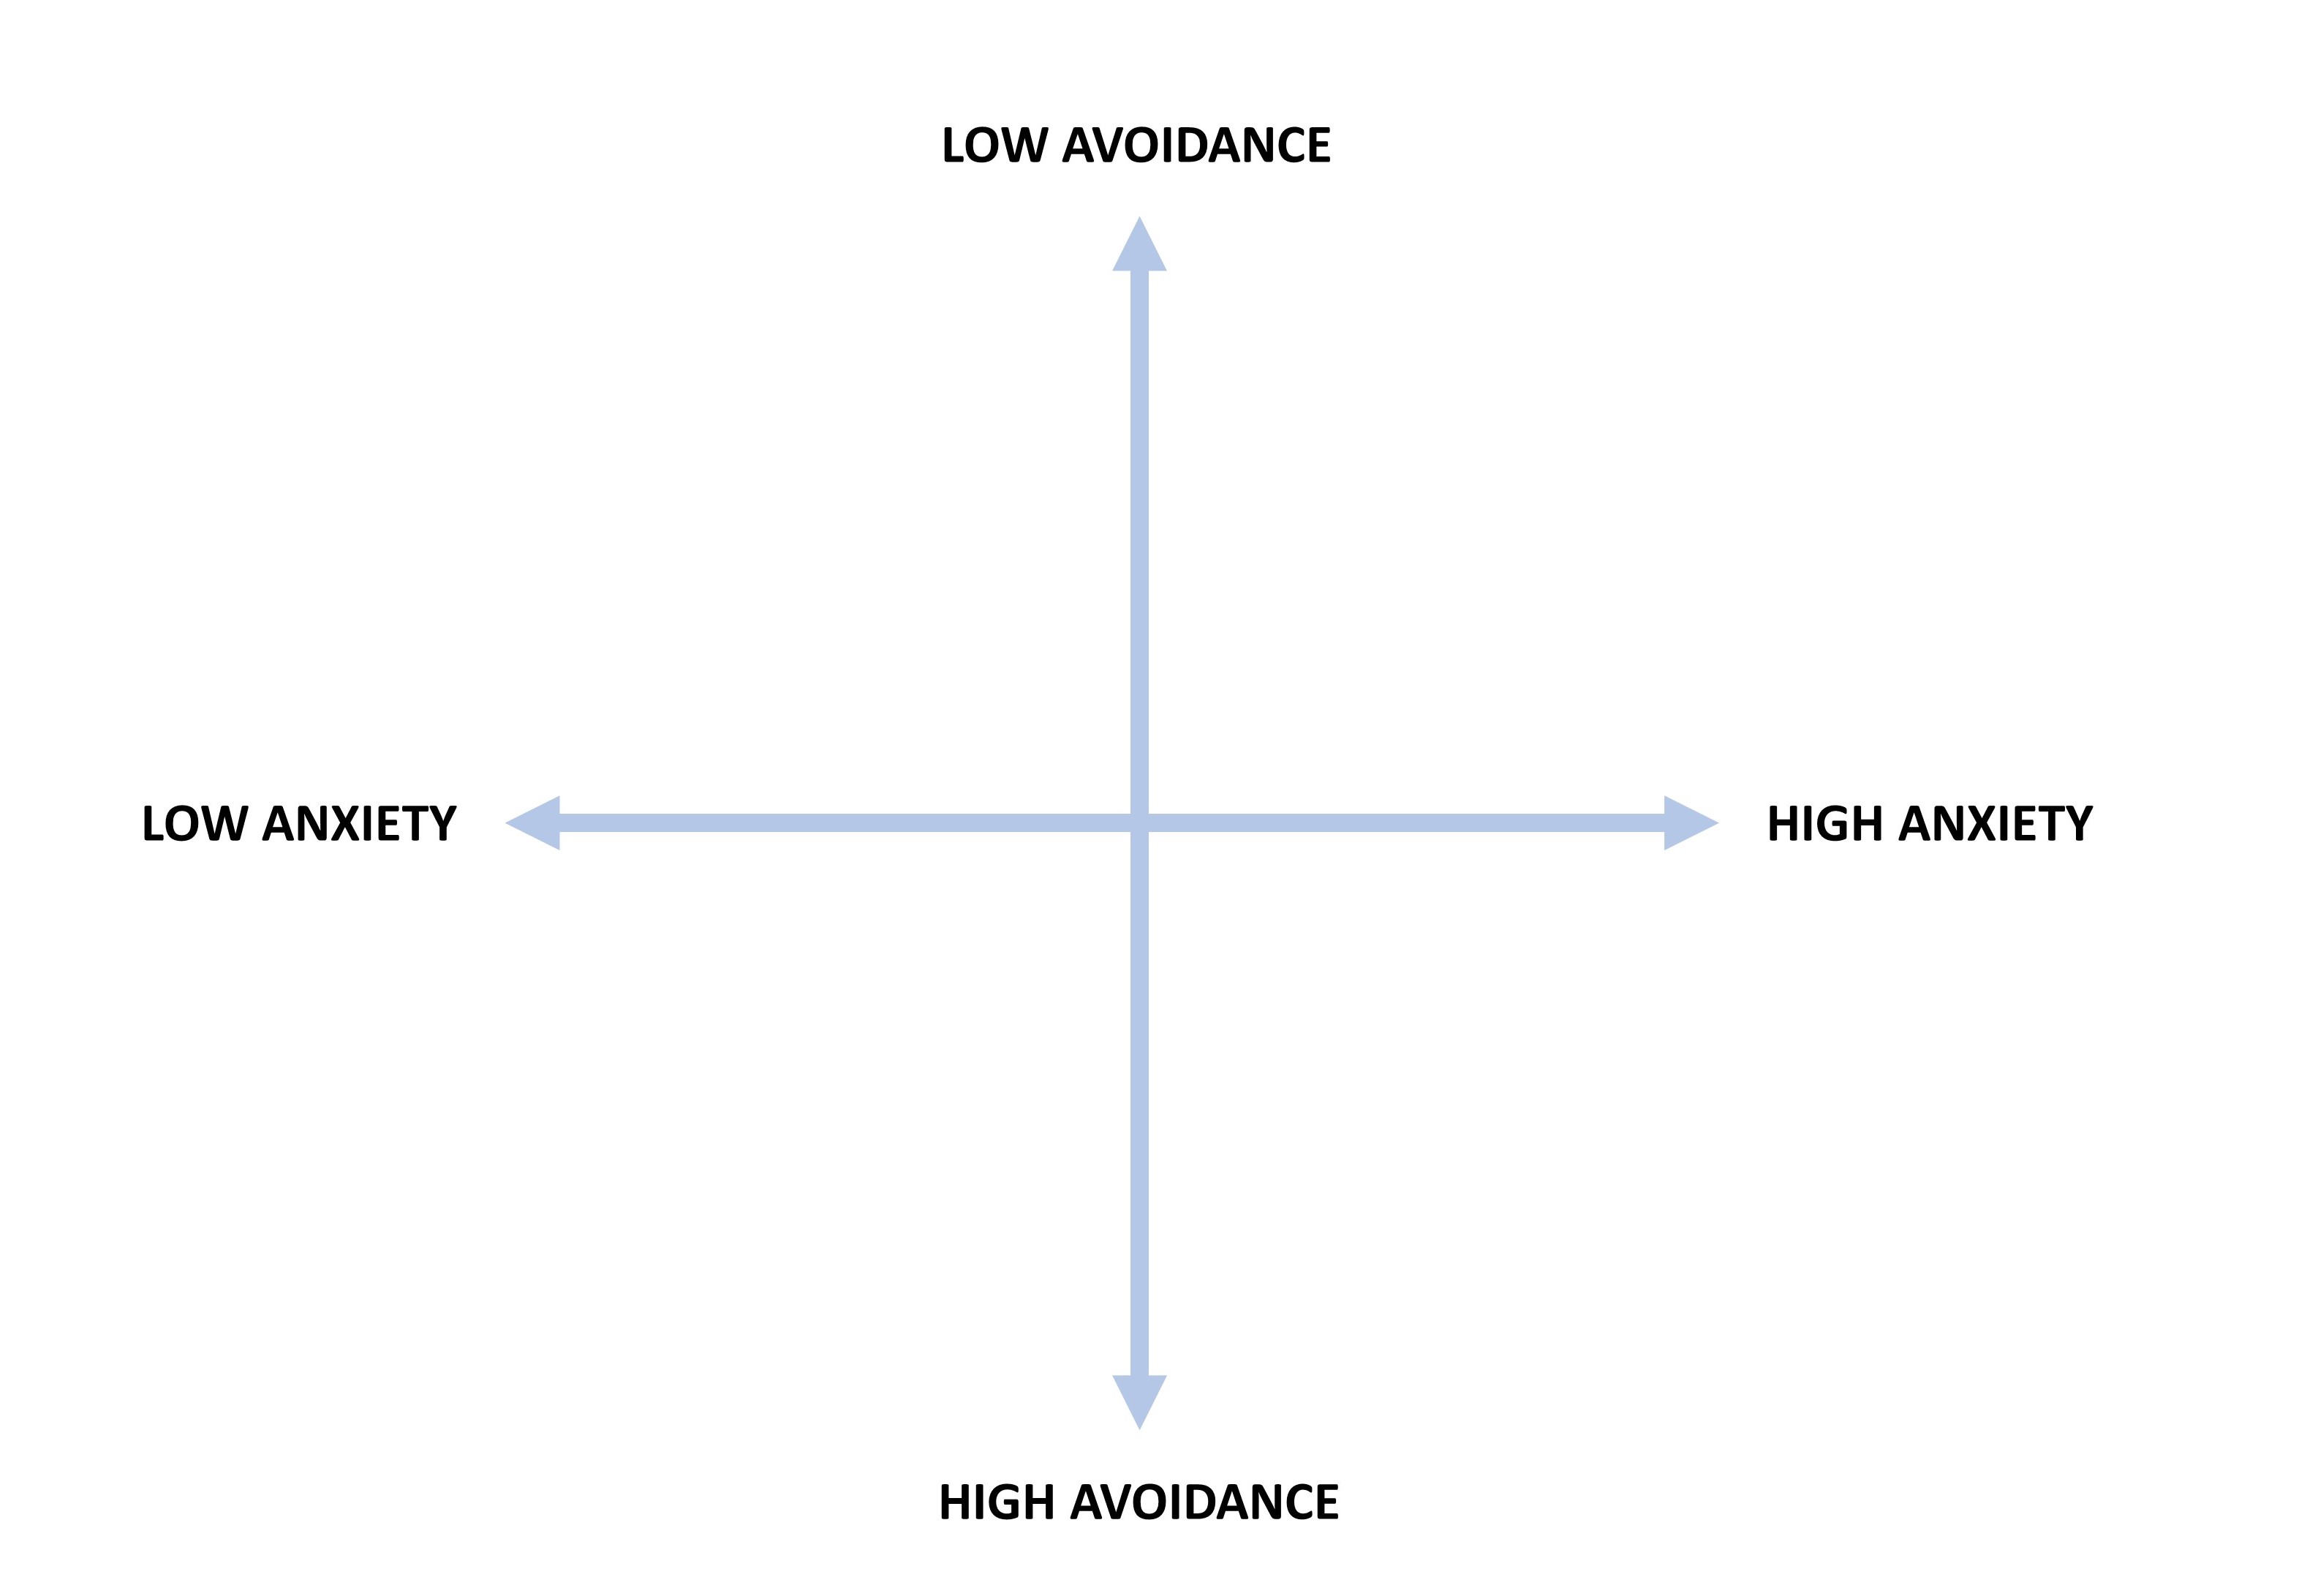 Figure 2: The two-dimensional model of individual differences in adult attachment (Adapted from the figure at http://labs.psychology.illinois.edu/~rcfraley/measures/measures.html)